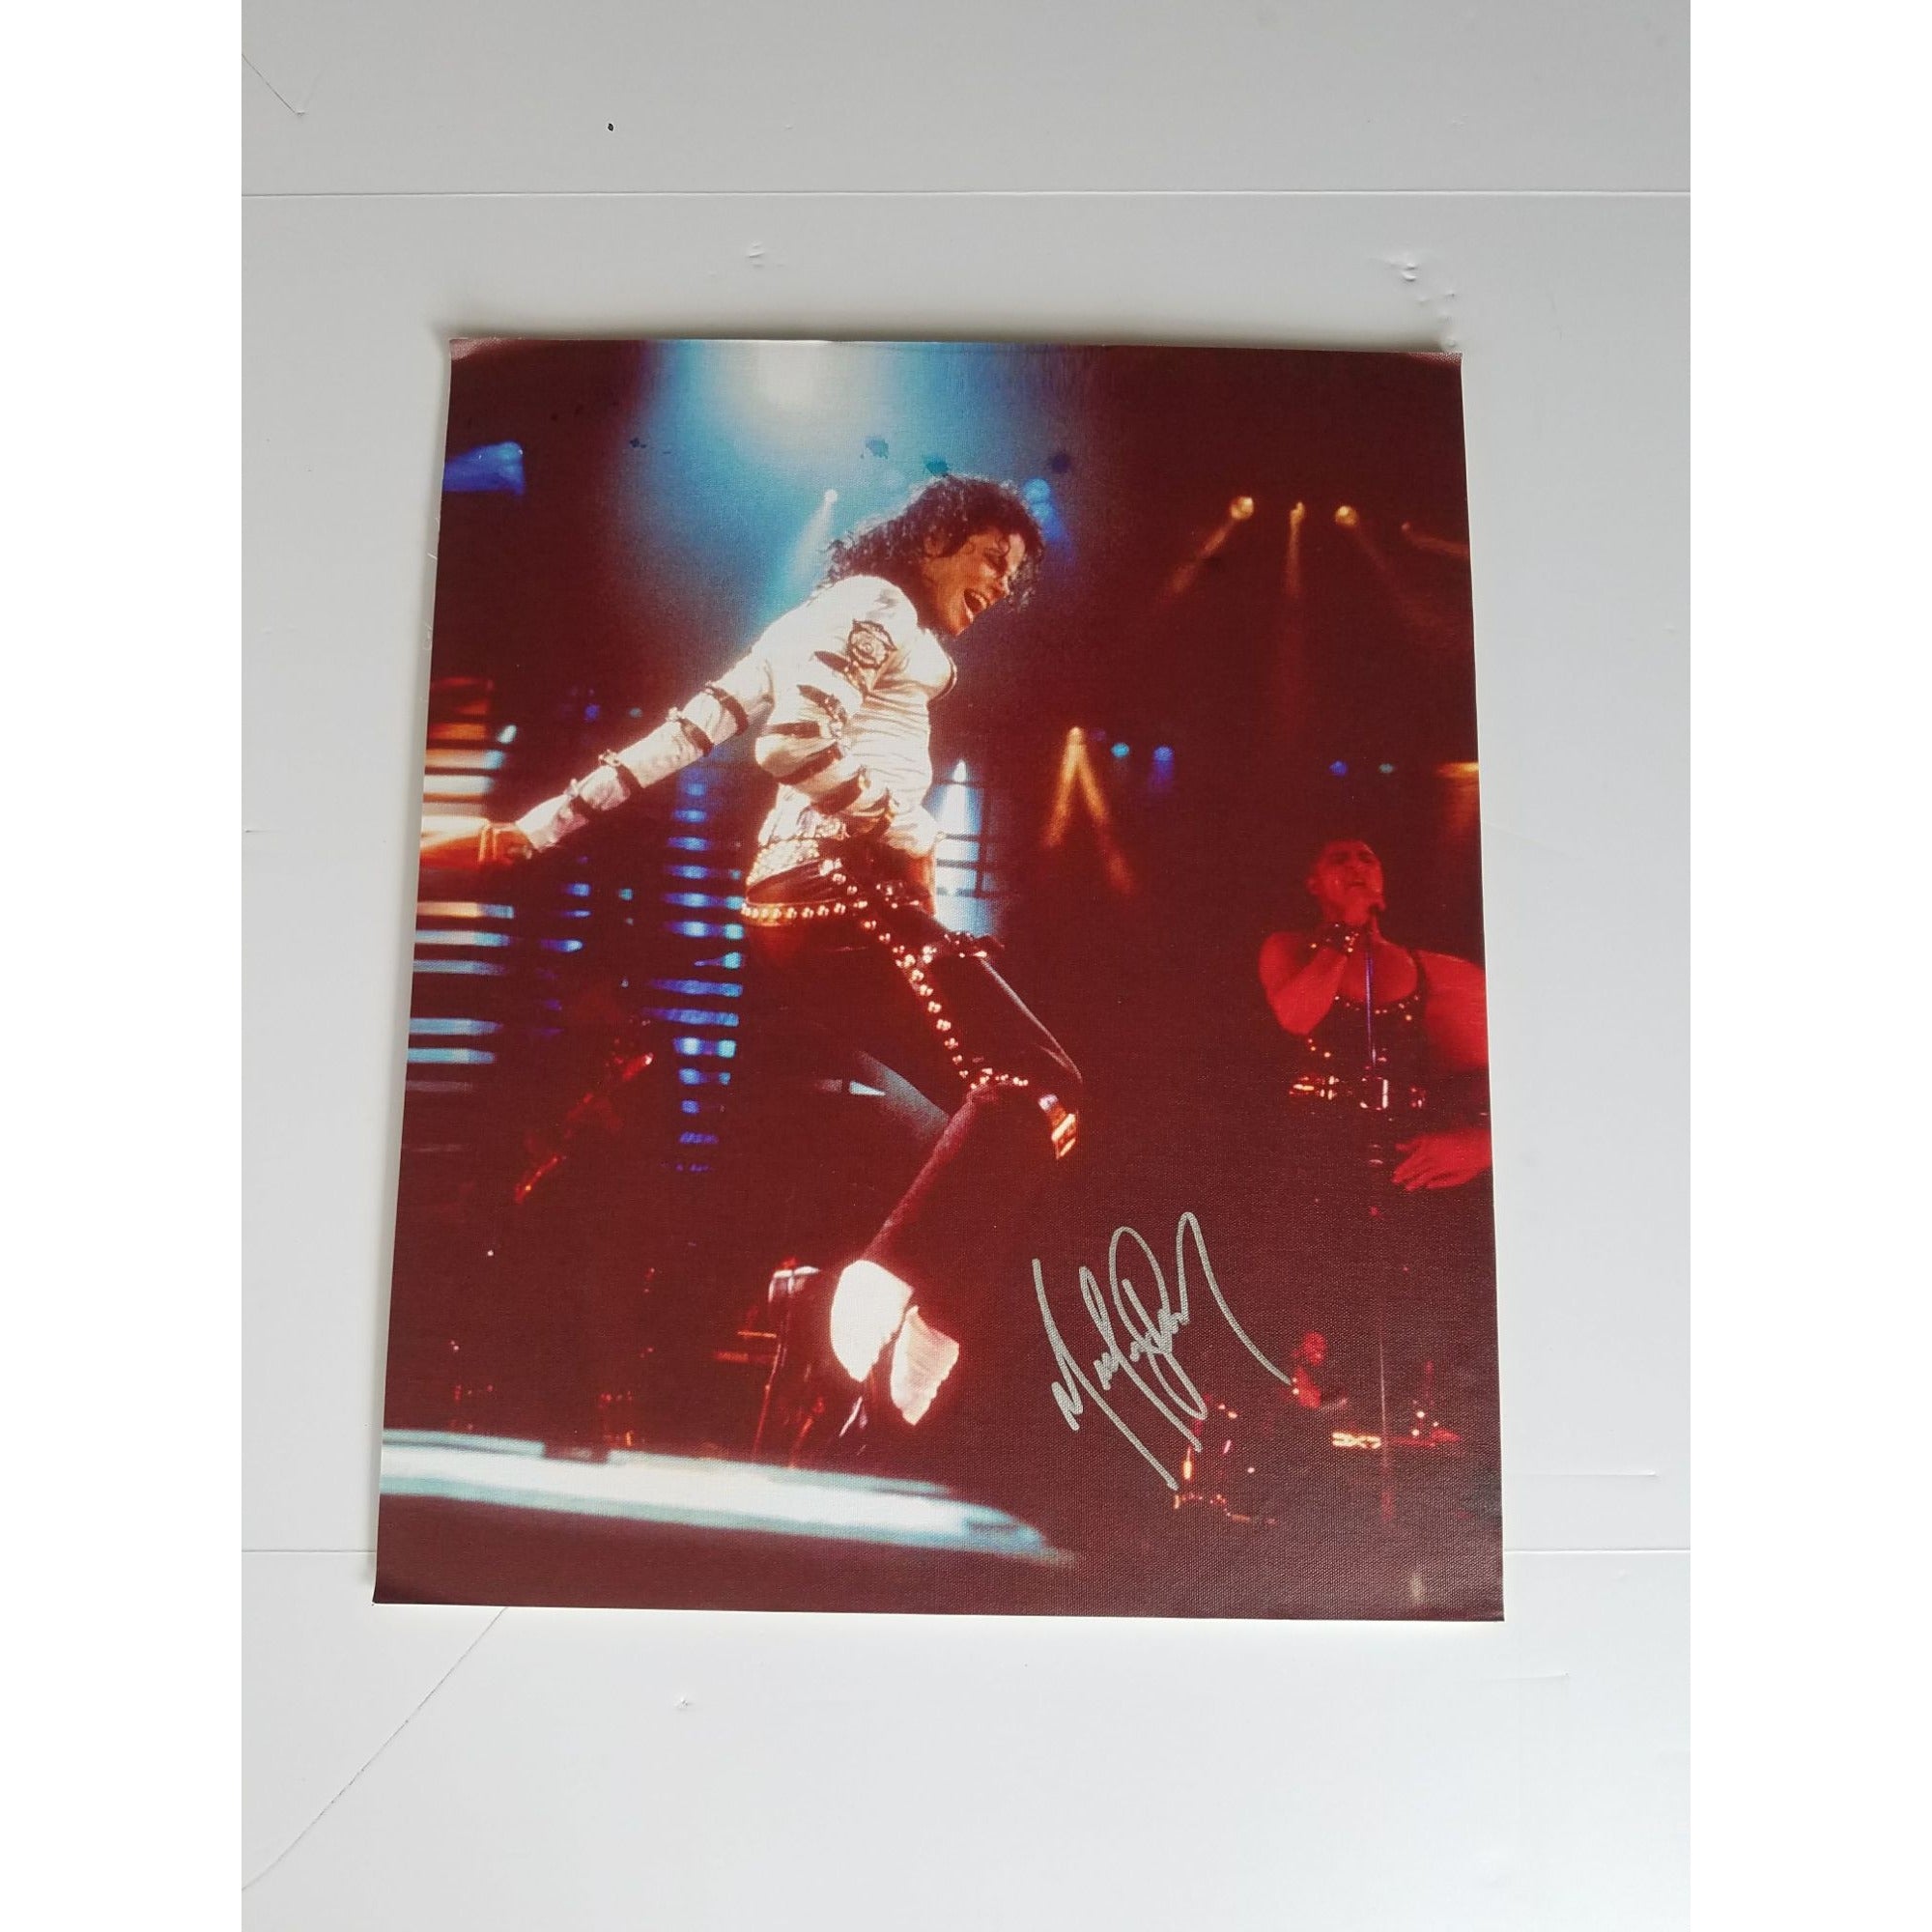 Michael Jackson 16x20 photo mounted signed with proof